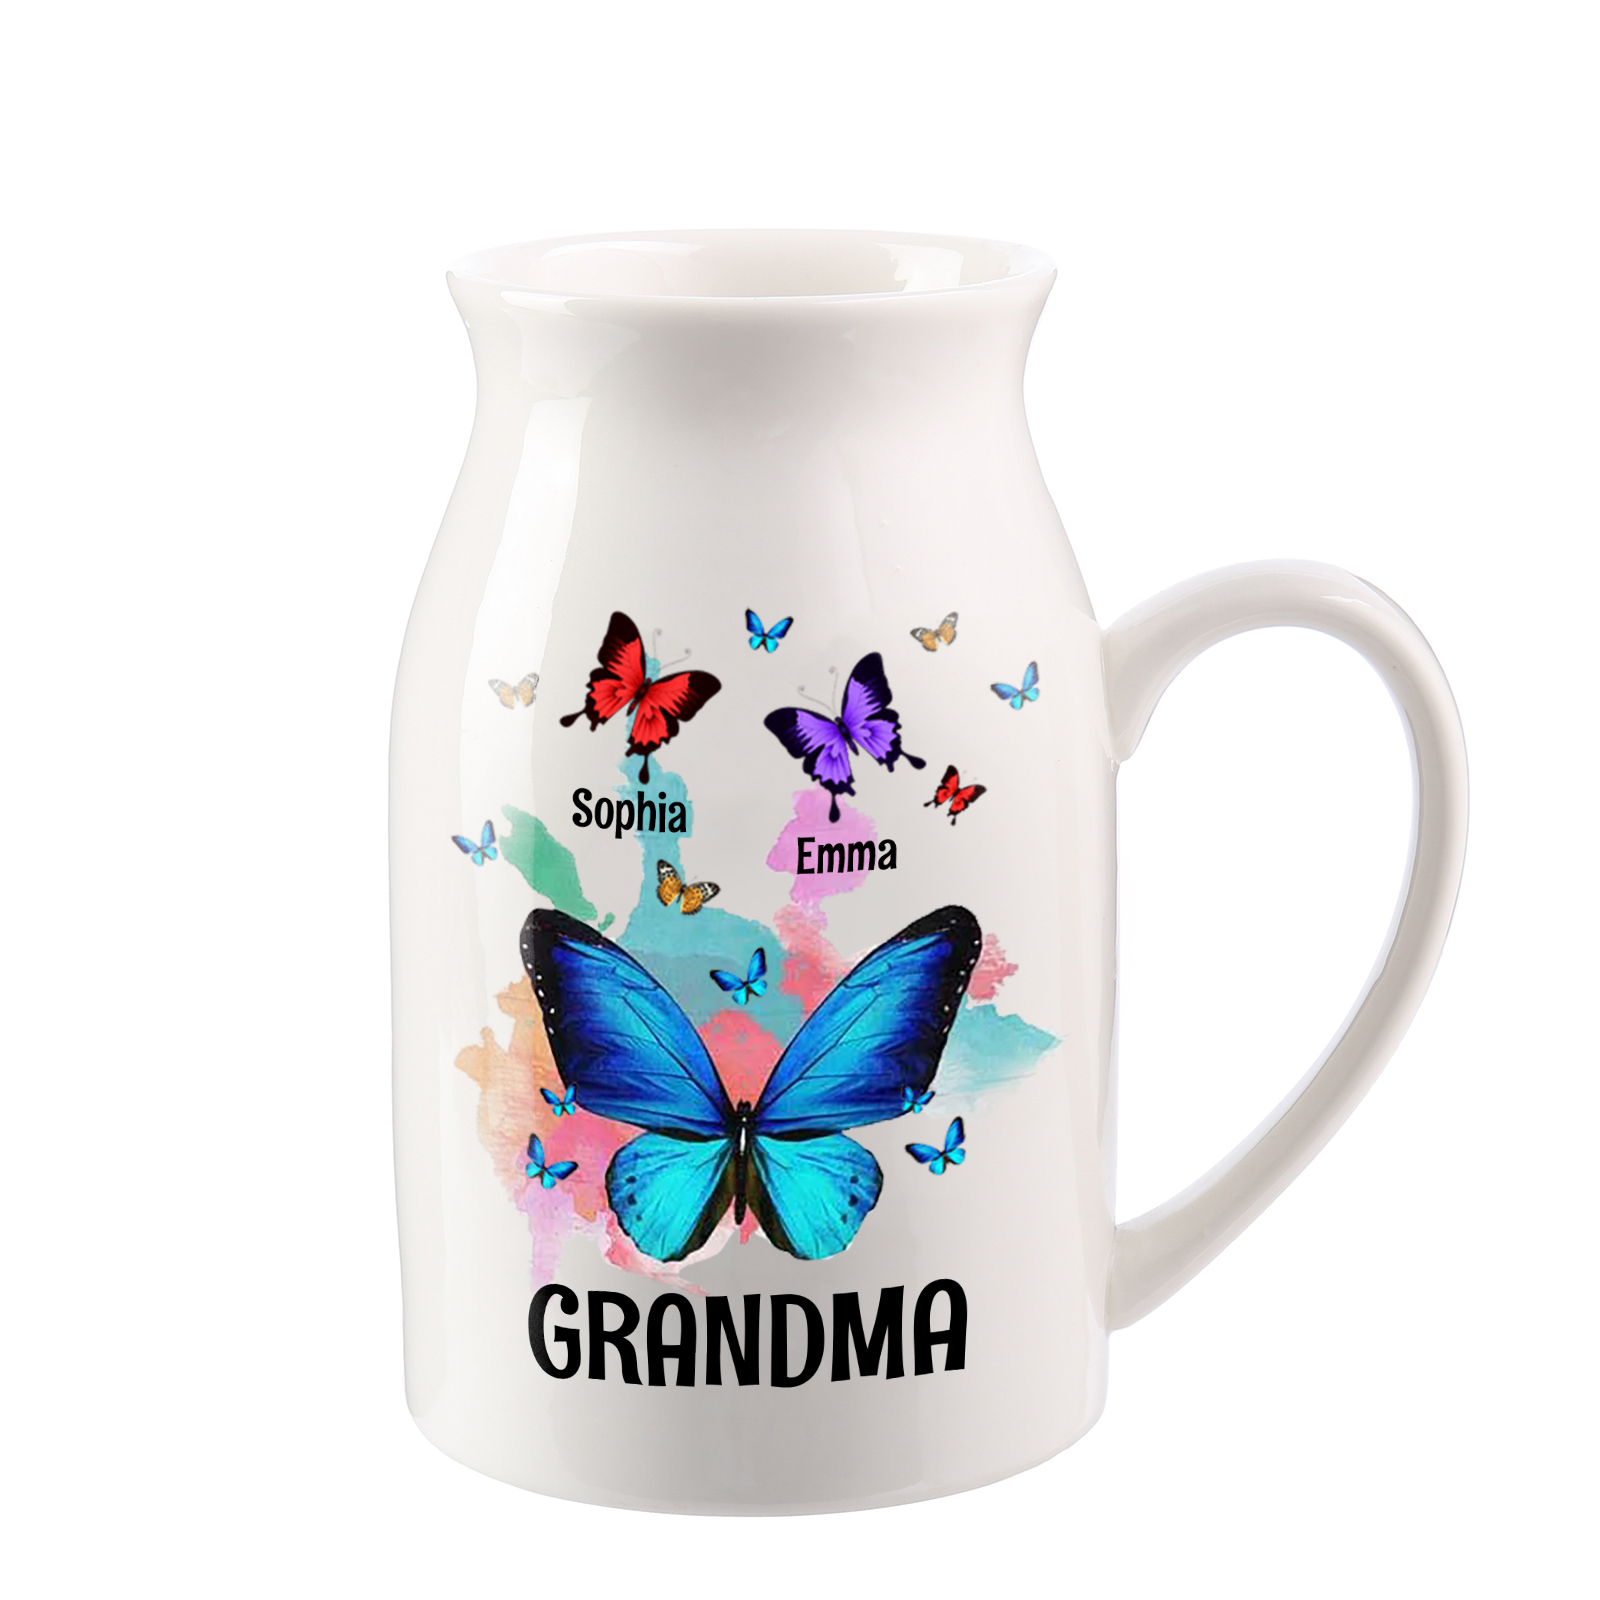 2 Names - Personalized Beautiful Colorful Butterfly Style Ceramic Vase with Customizable Names As a Wonderful Gift For Grandma